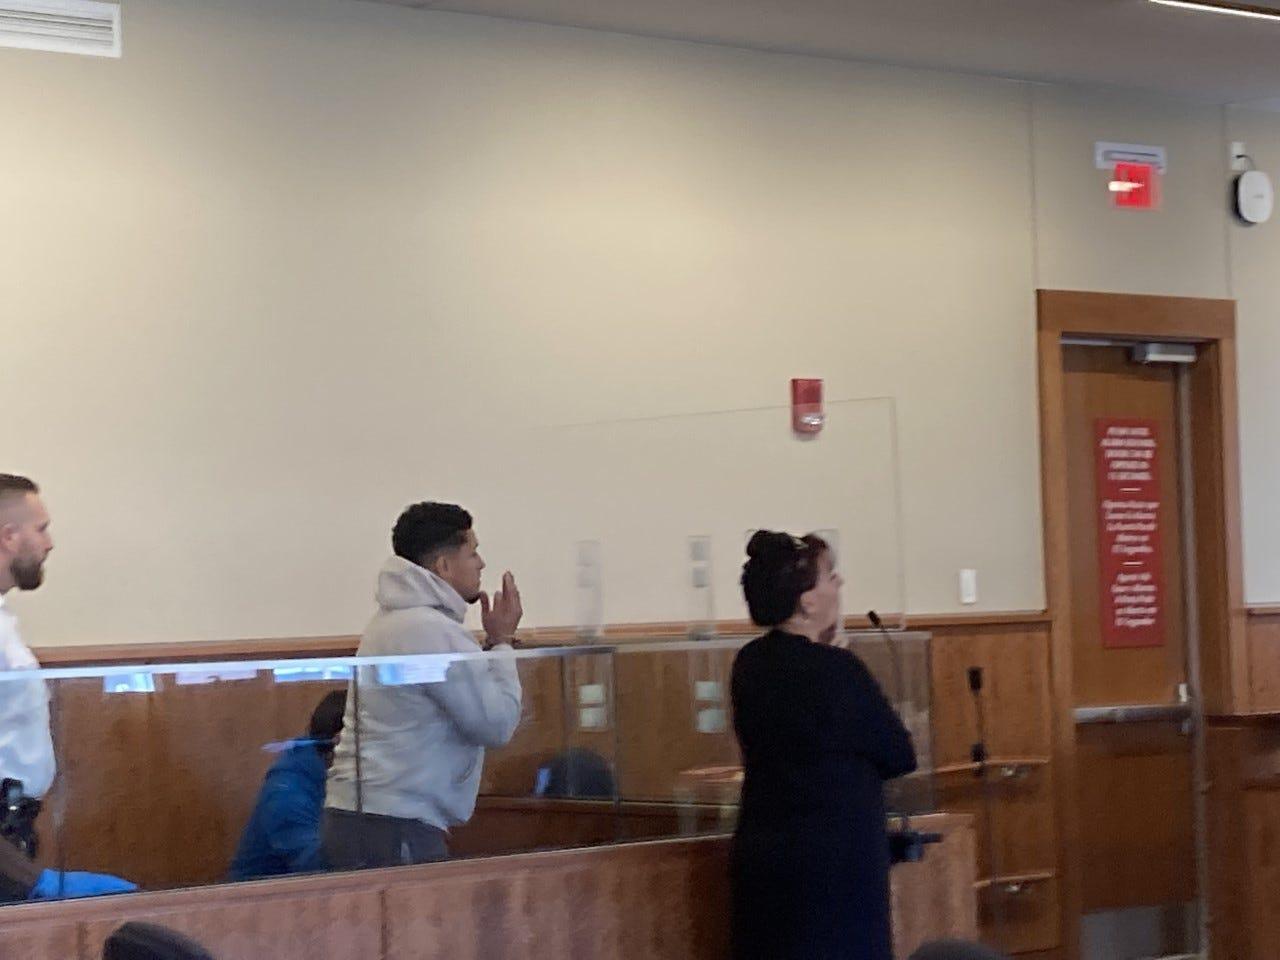 Jose Pagan pleads not guilty and is ordered held on $25,000 cash bail for alleged role in Sunday